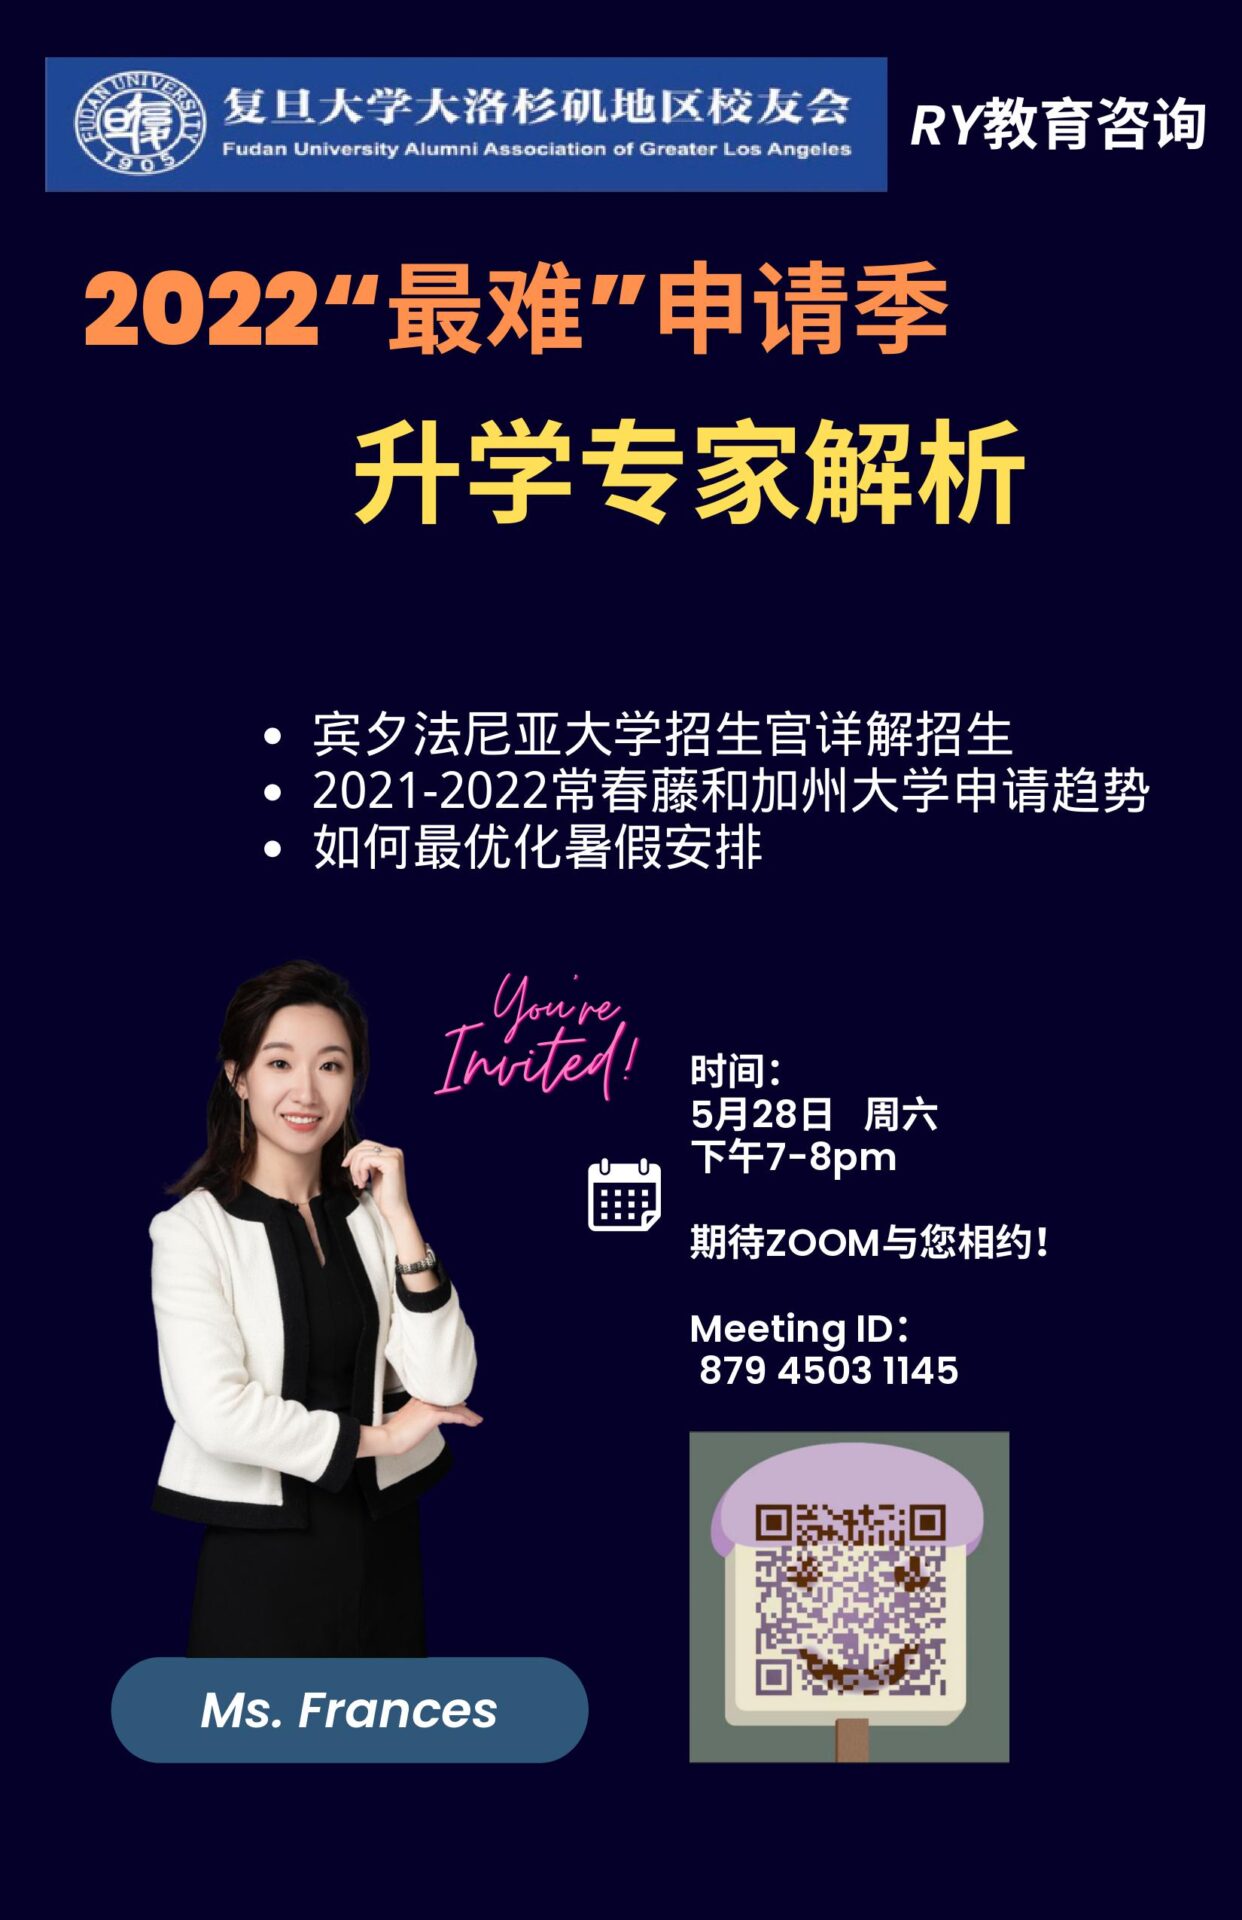 A poster with an asian woman holding a microphone.